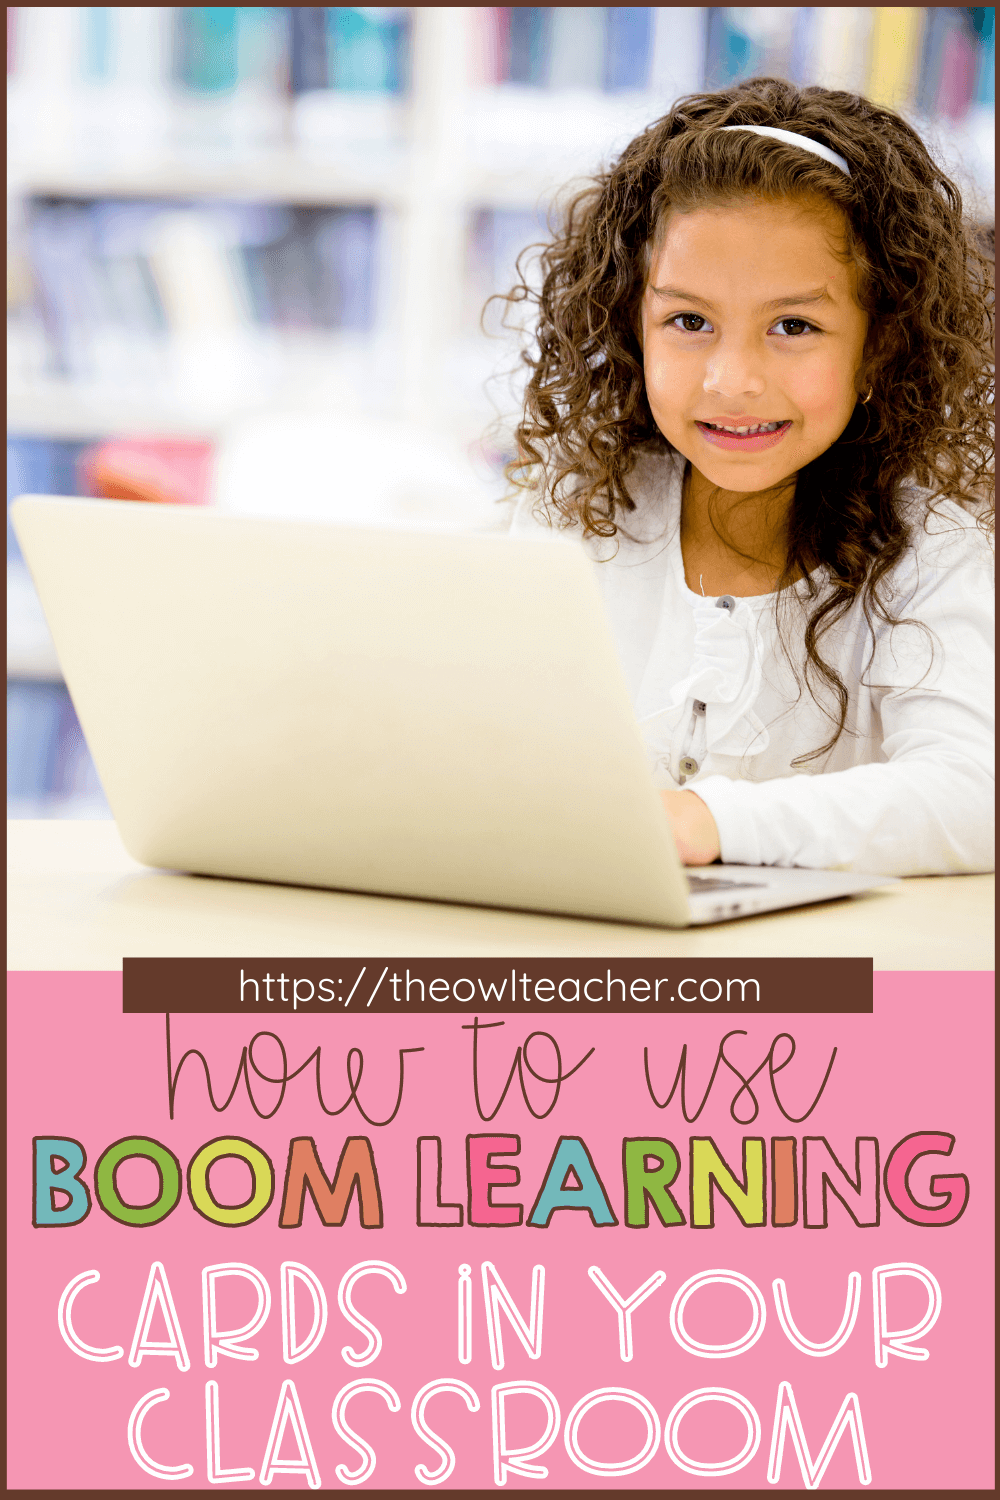 Have you heard about Boom Learning Cards, but wasn't exactly sure what they were or how to use them? This post covers everything you need to know to get started in the classroom with Boom Decks and to get started! Save this pin and click through now. via @deshawtammygmail.com